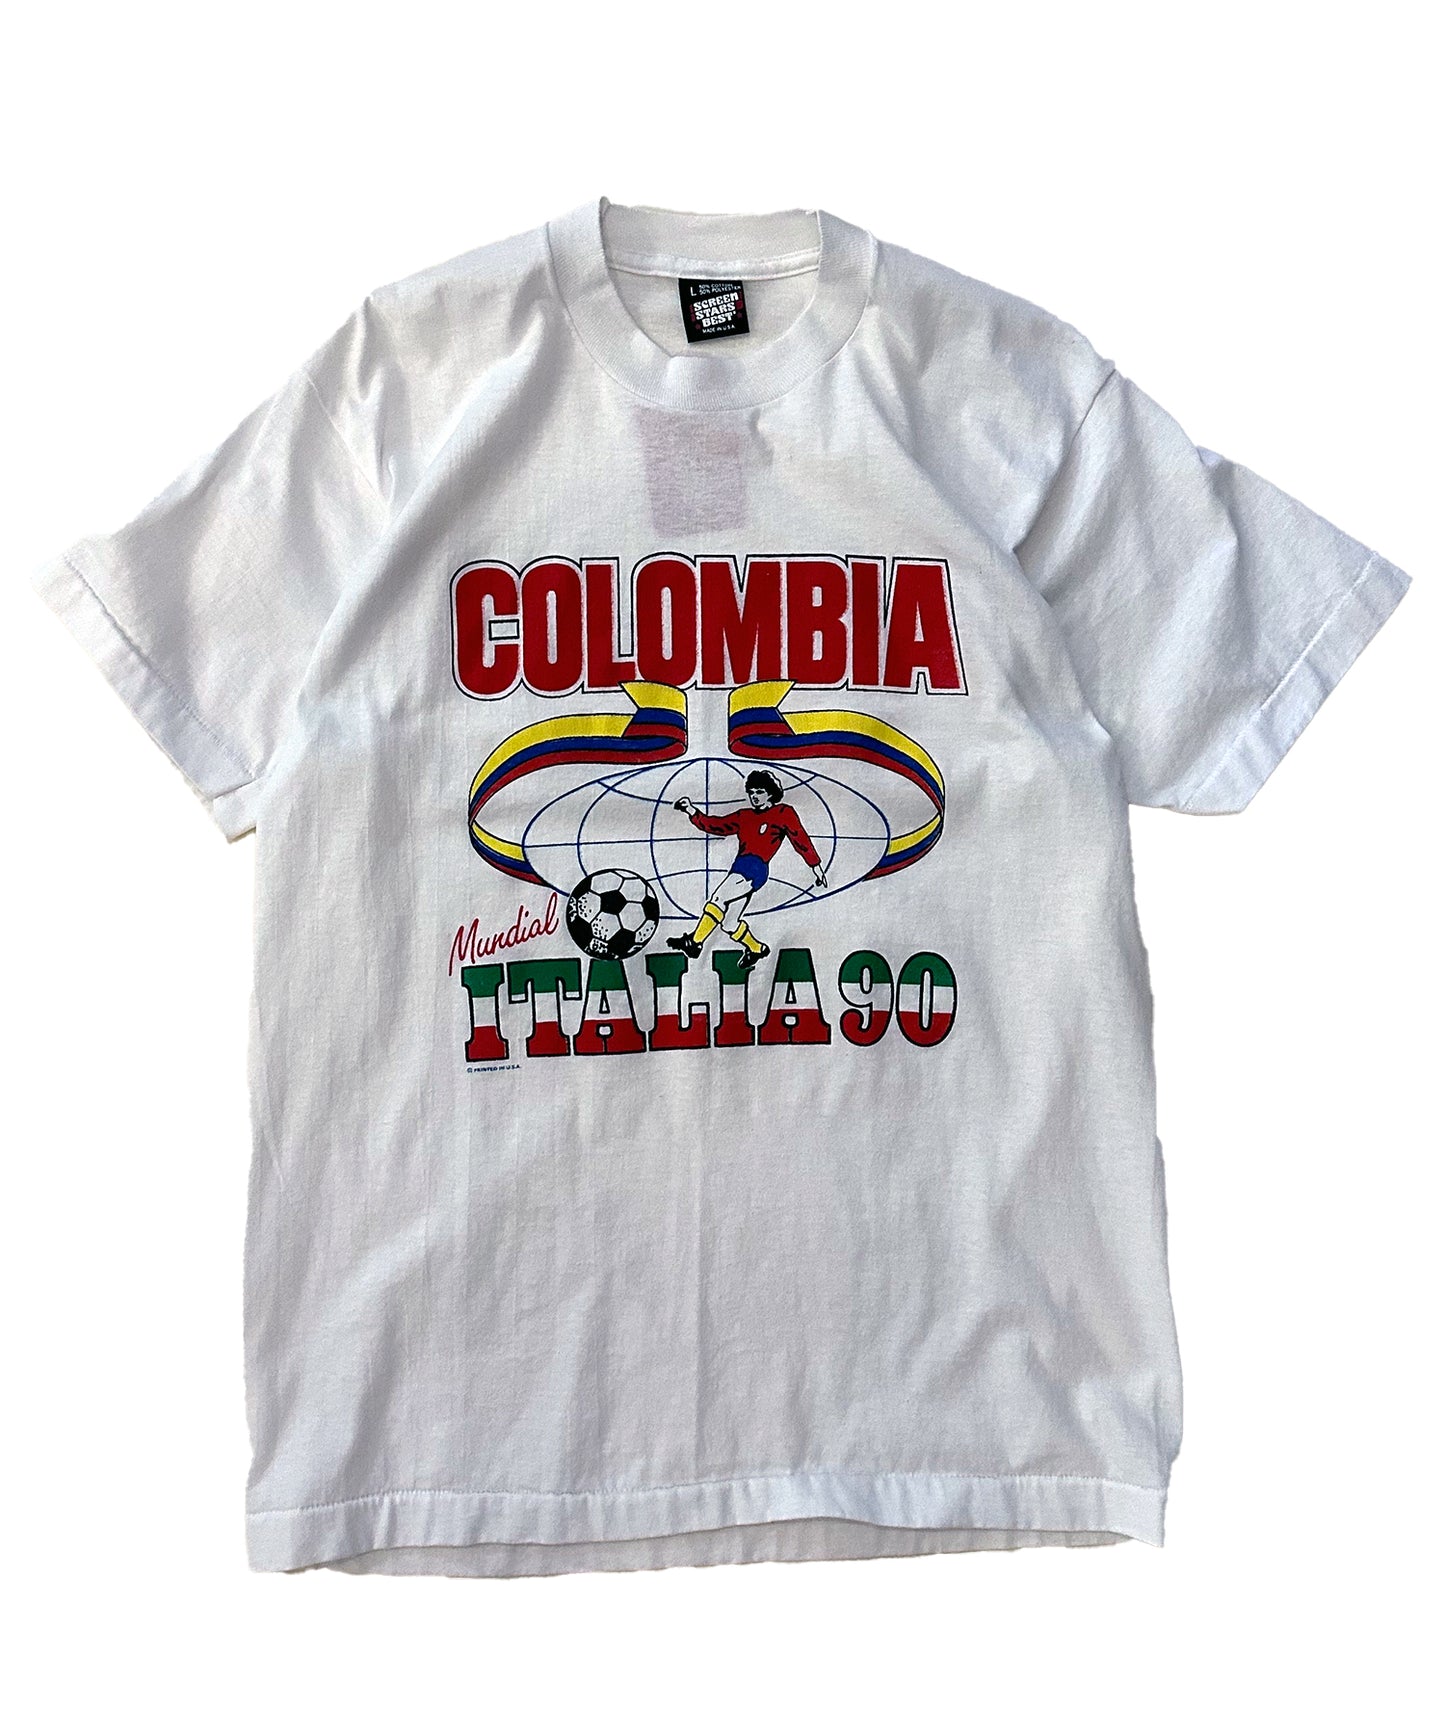 Vintage Colombia Soccer Tee (Large)